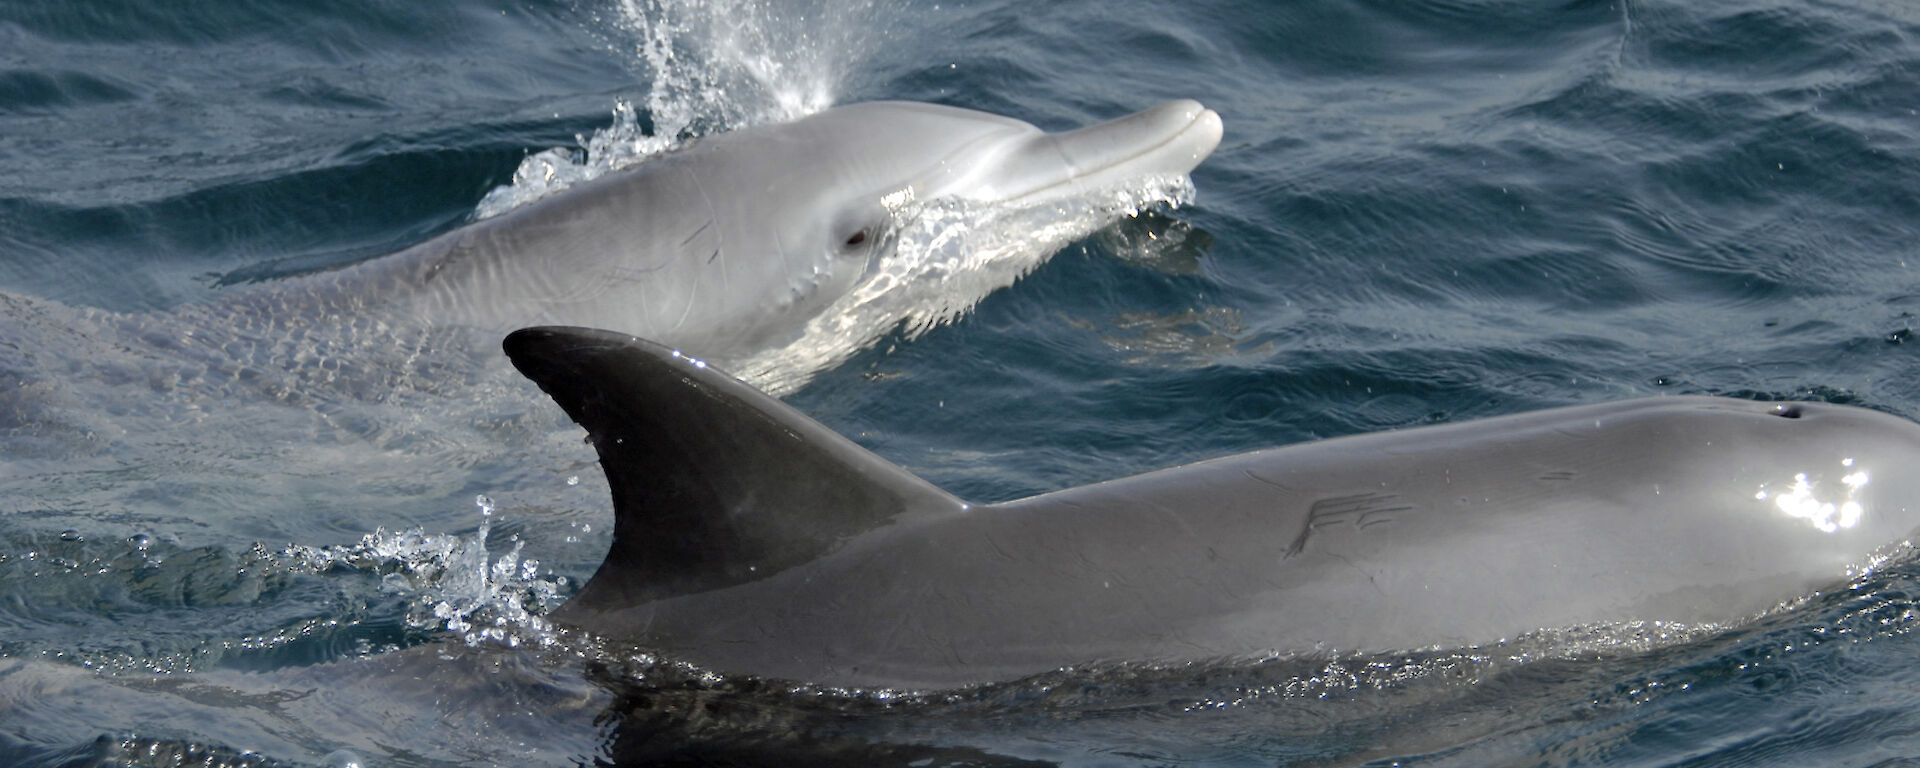 Indo-Pacific bottlenose dolphins, one blowing water from its blowhole